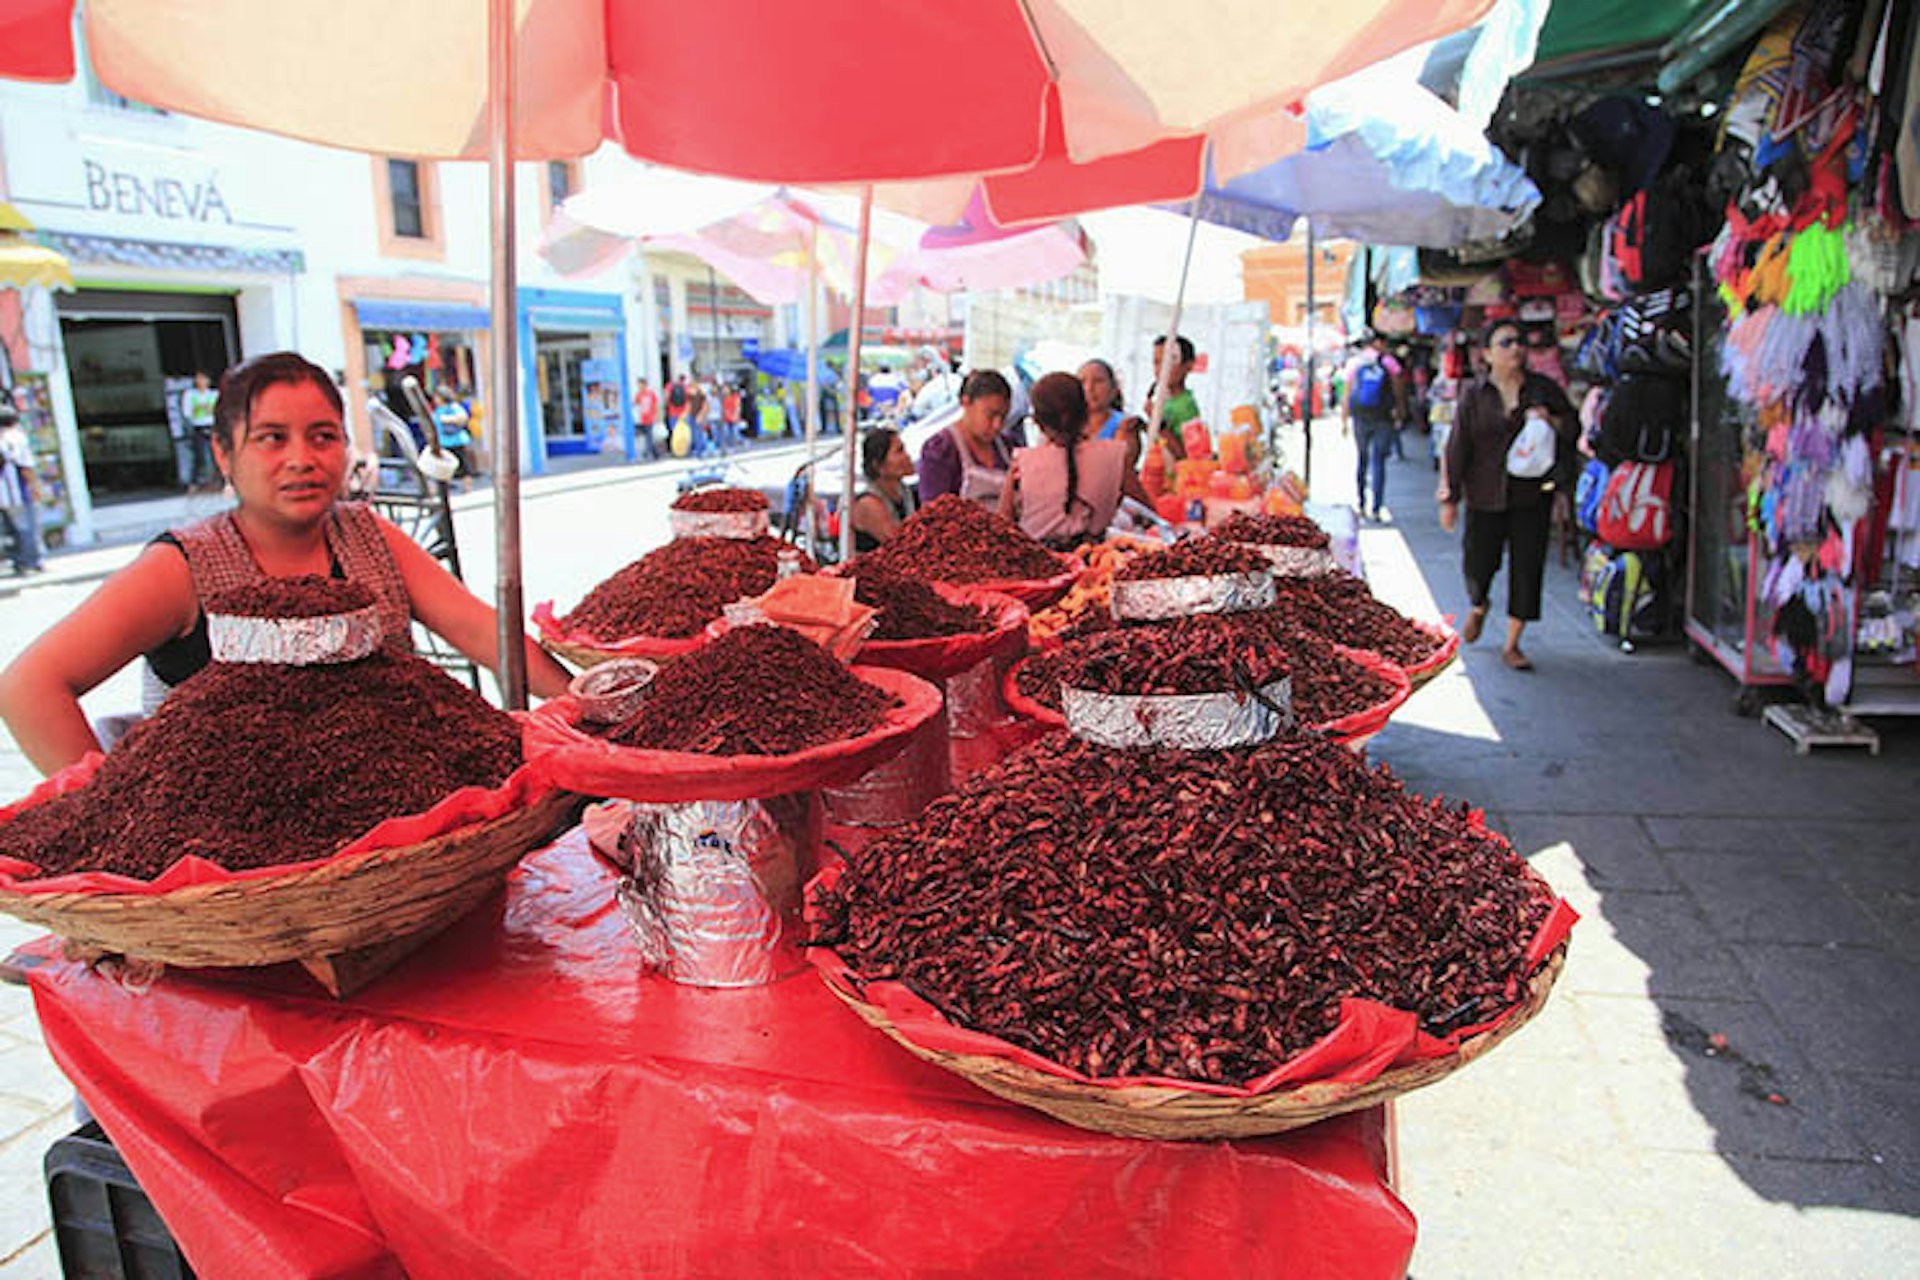 Like popcorn with legs, who could resist? Chapulines on sale in Oaxaca, Mexico. Image by Wendy Connett / Robert Harding World Imagery / Getty Images